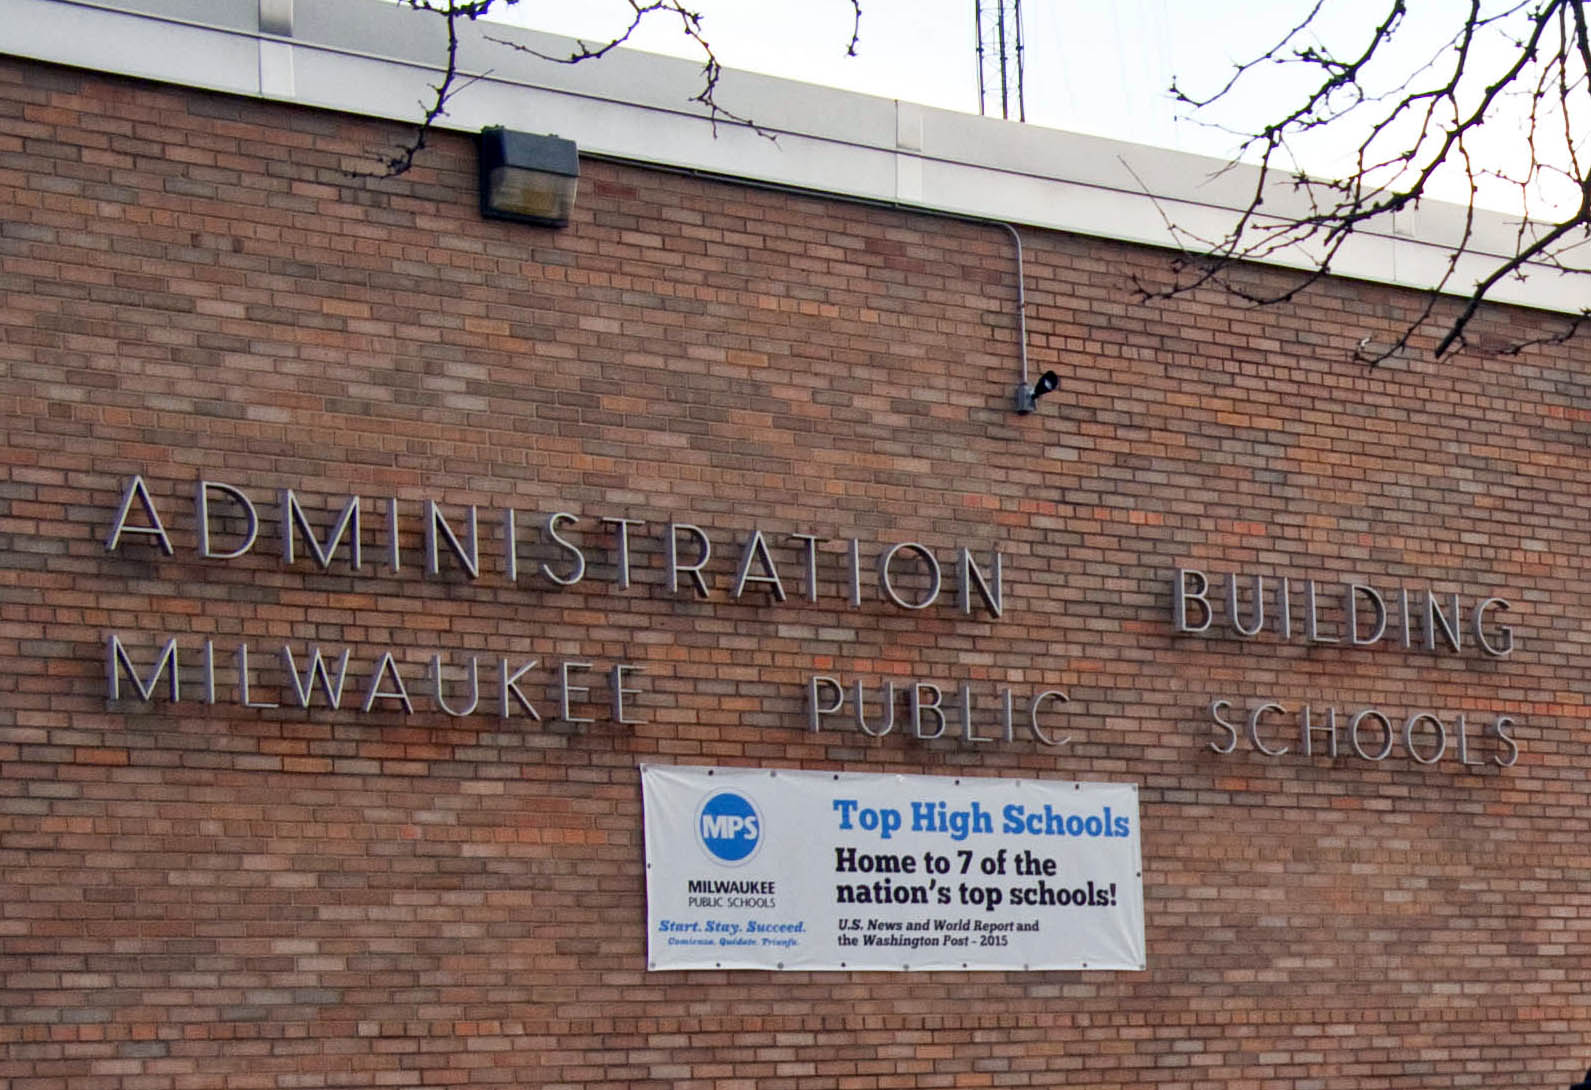 State says Milwaukee Public Schools could lose funding over late finance reports